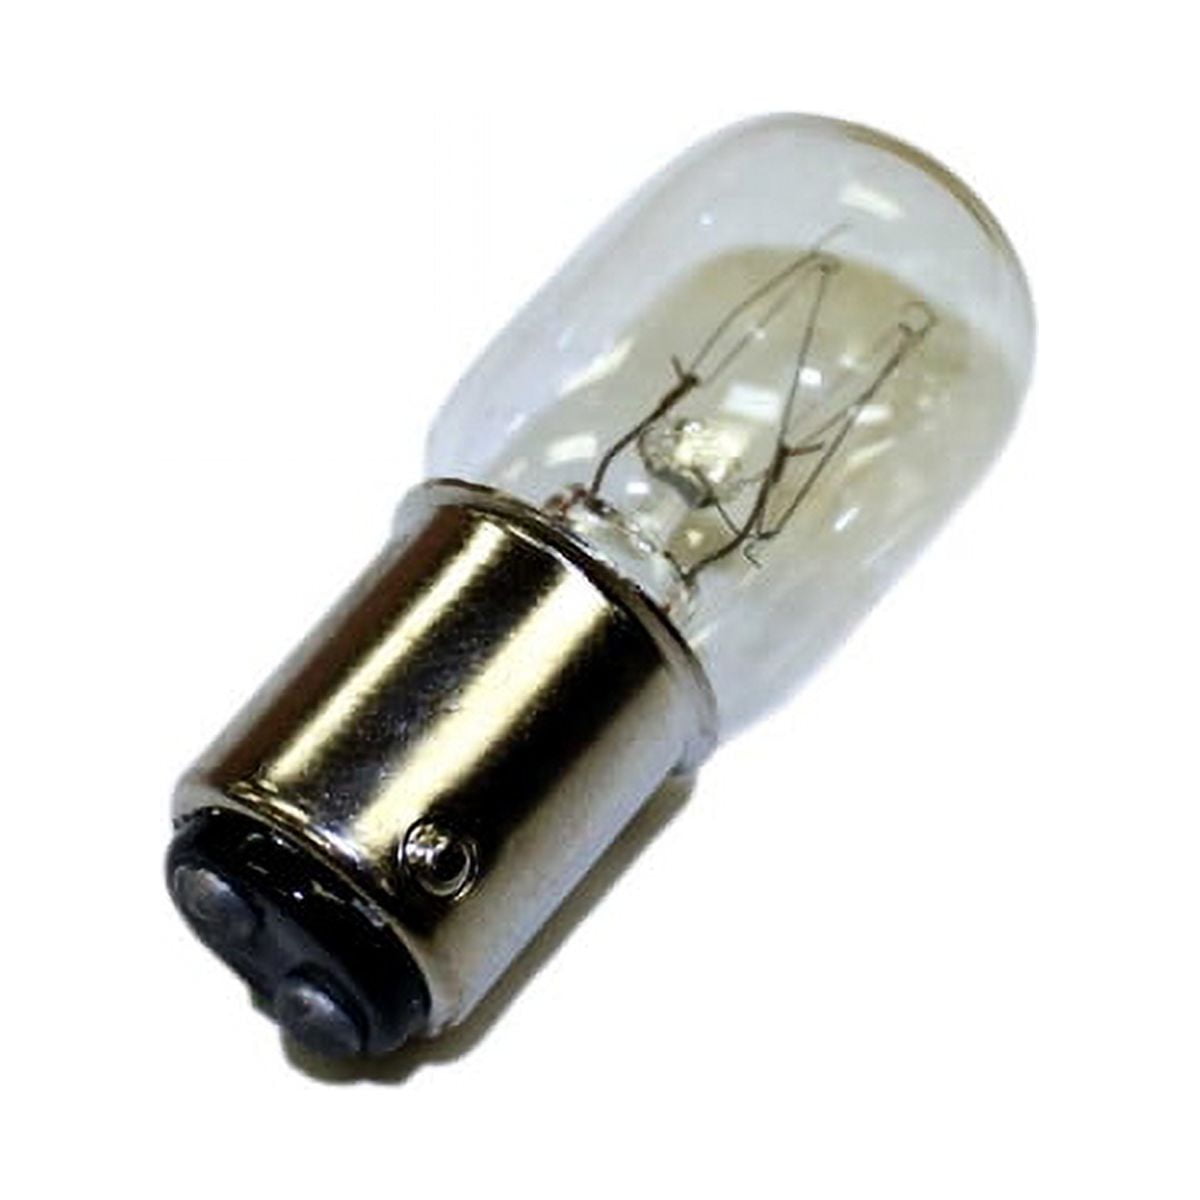 LED Light Bulb for The Singer Featherweight